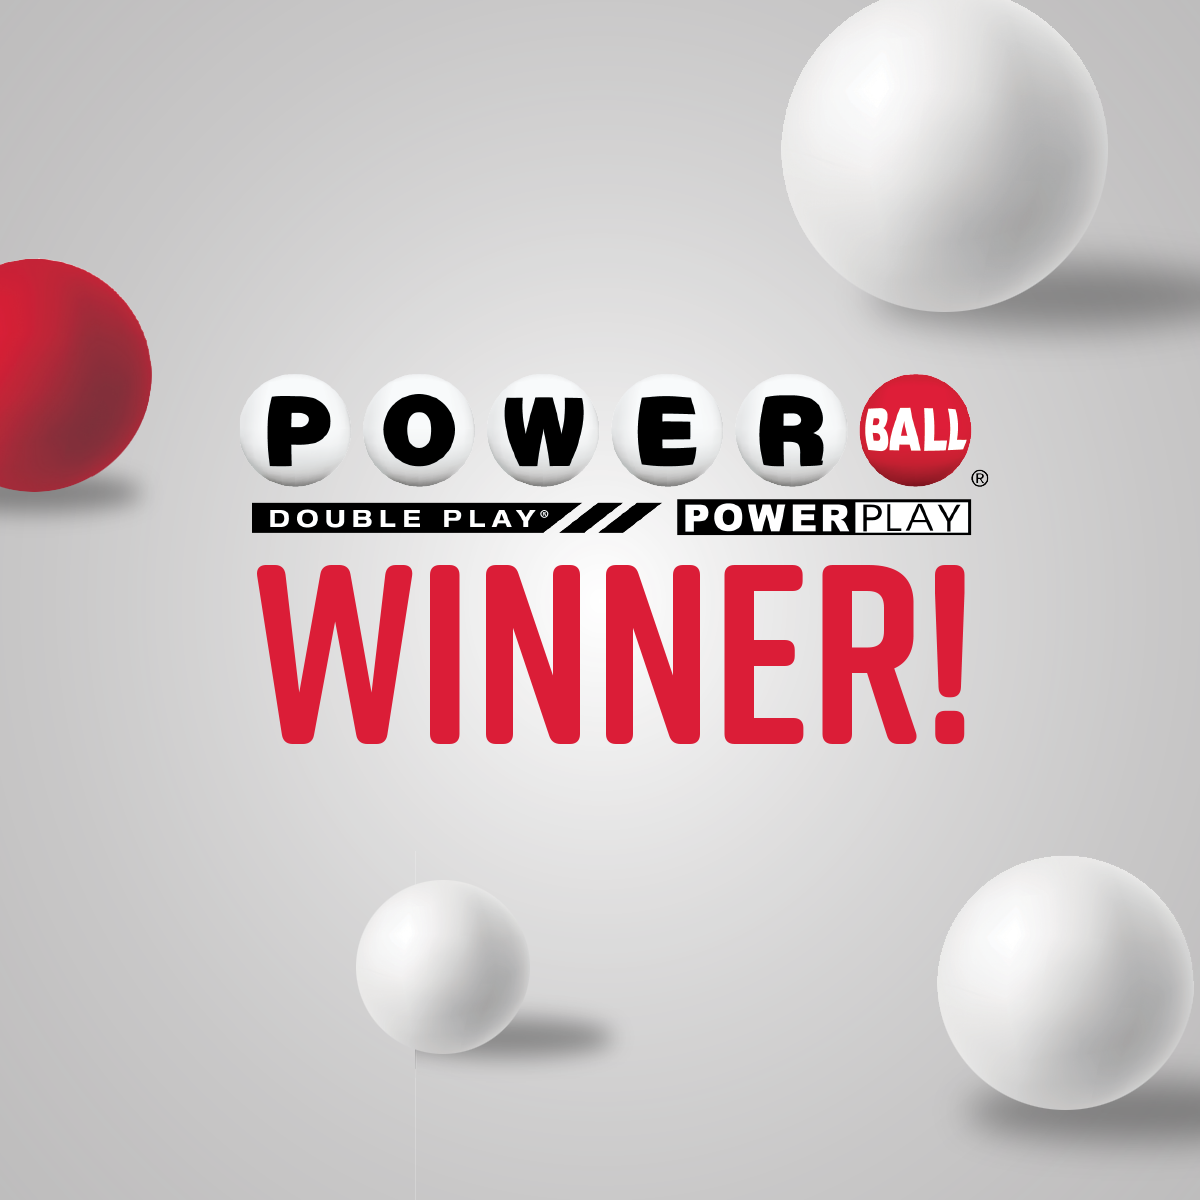 $100,000 Winning Powerball® with Power Play® Ticket Sold in Indianapolis for Wednesday's Drawing